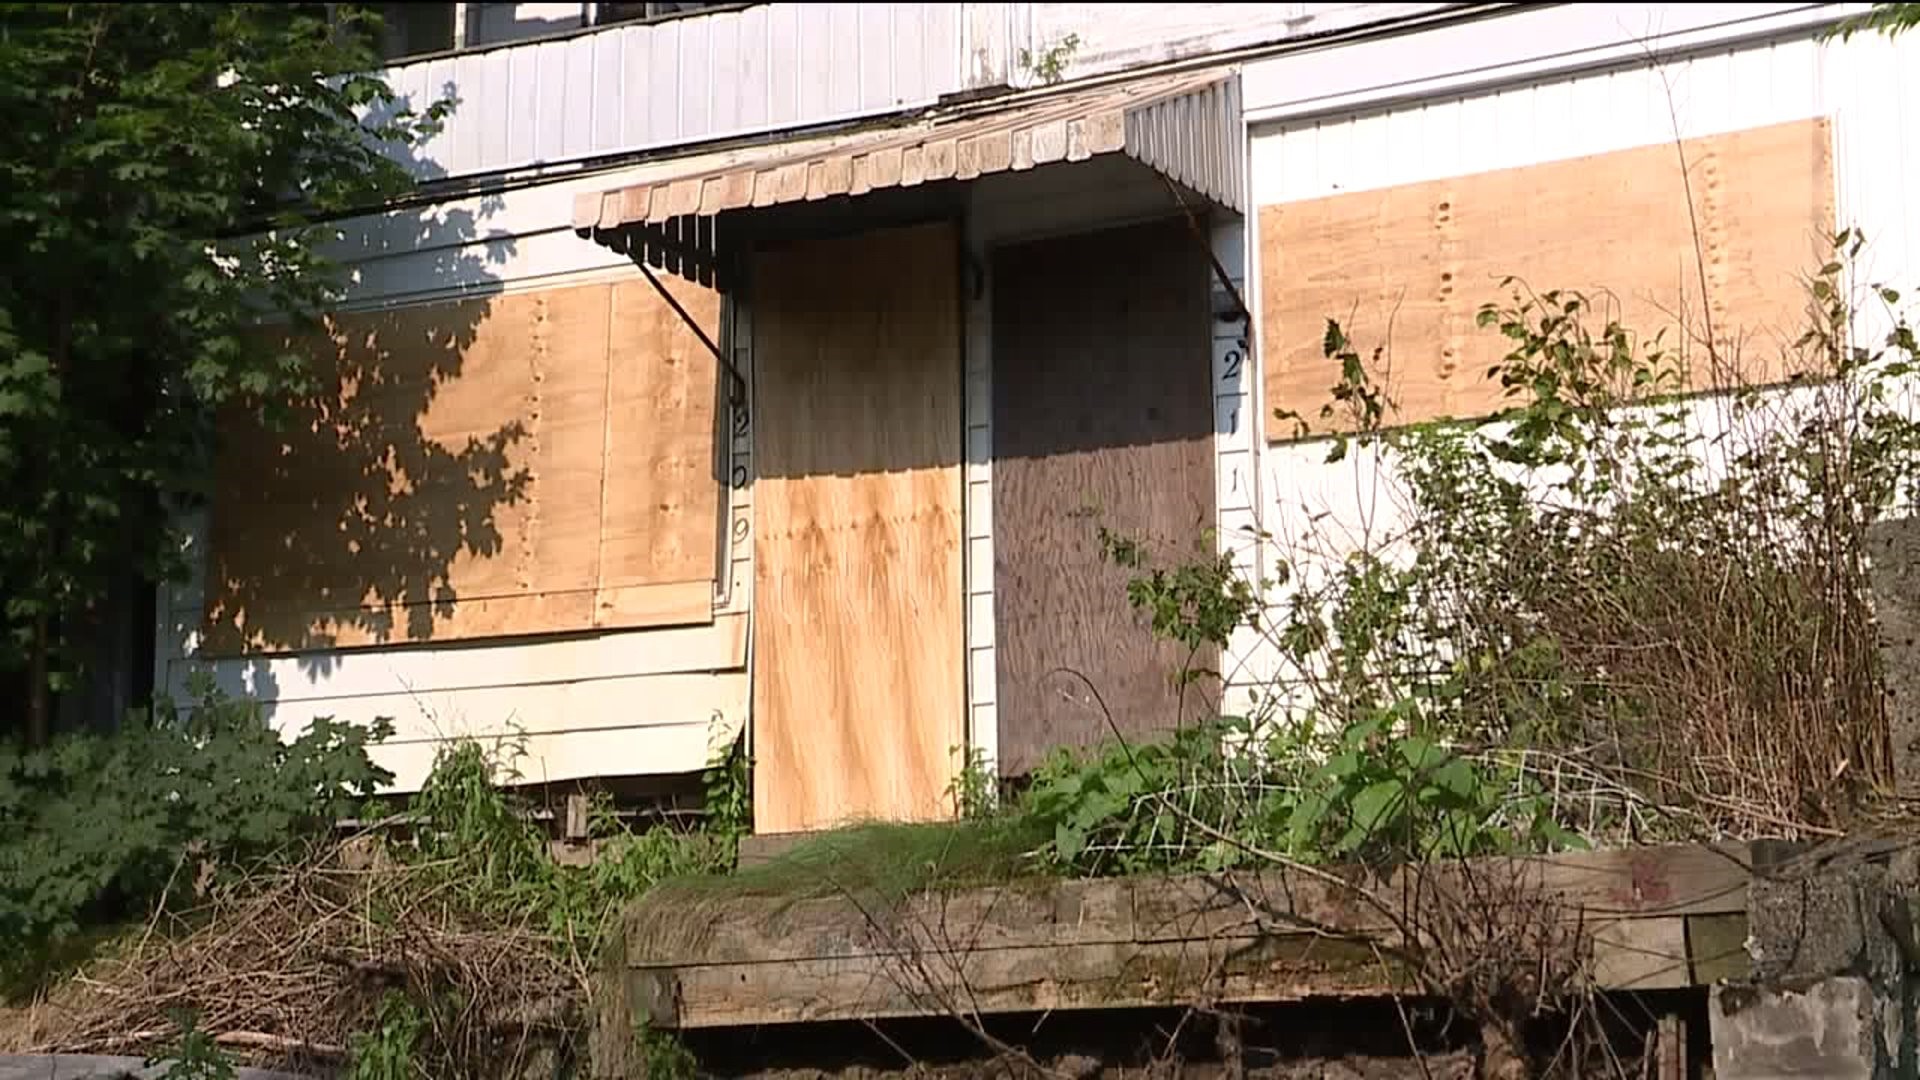 National Guard Boarding up Abandoned Homes in Shamokin to Combat Drug Use